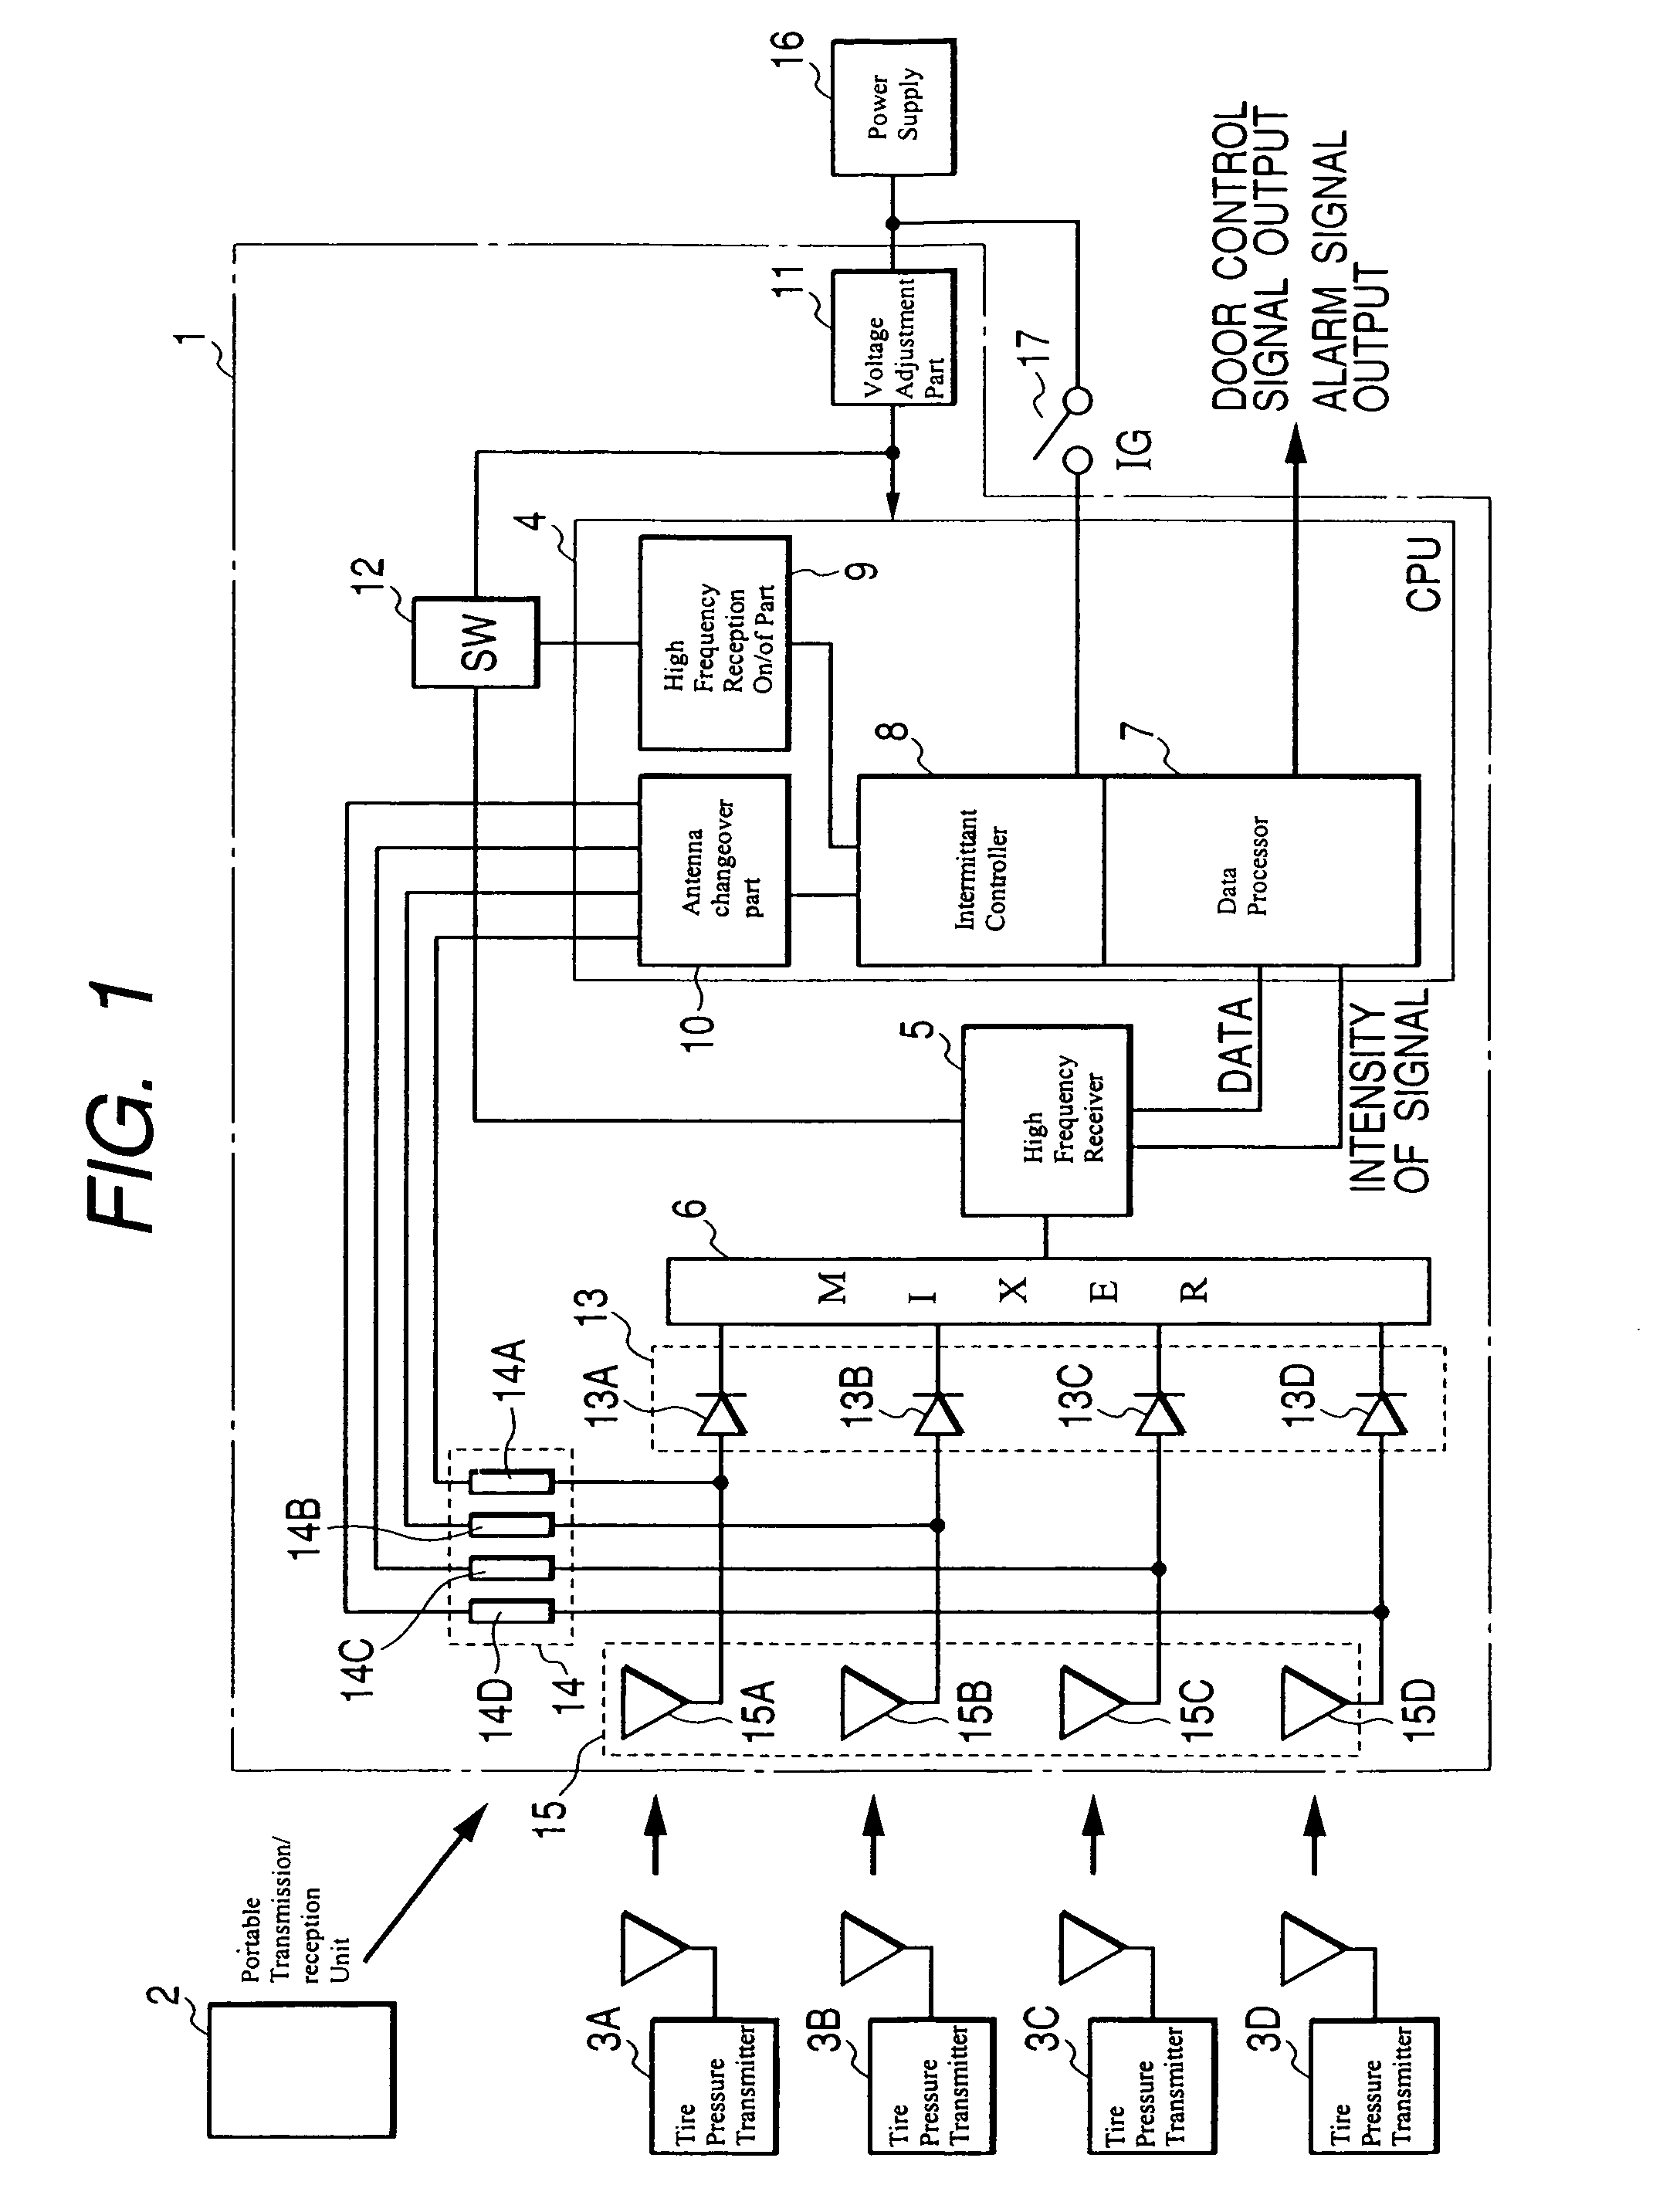 Keyless entry device having tire pressure monitoring function